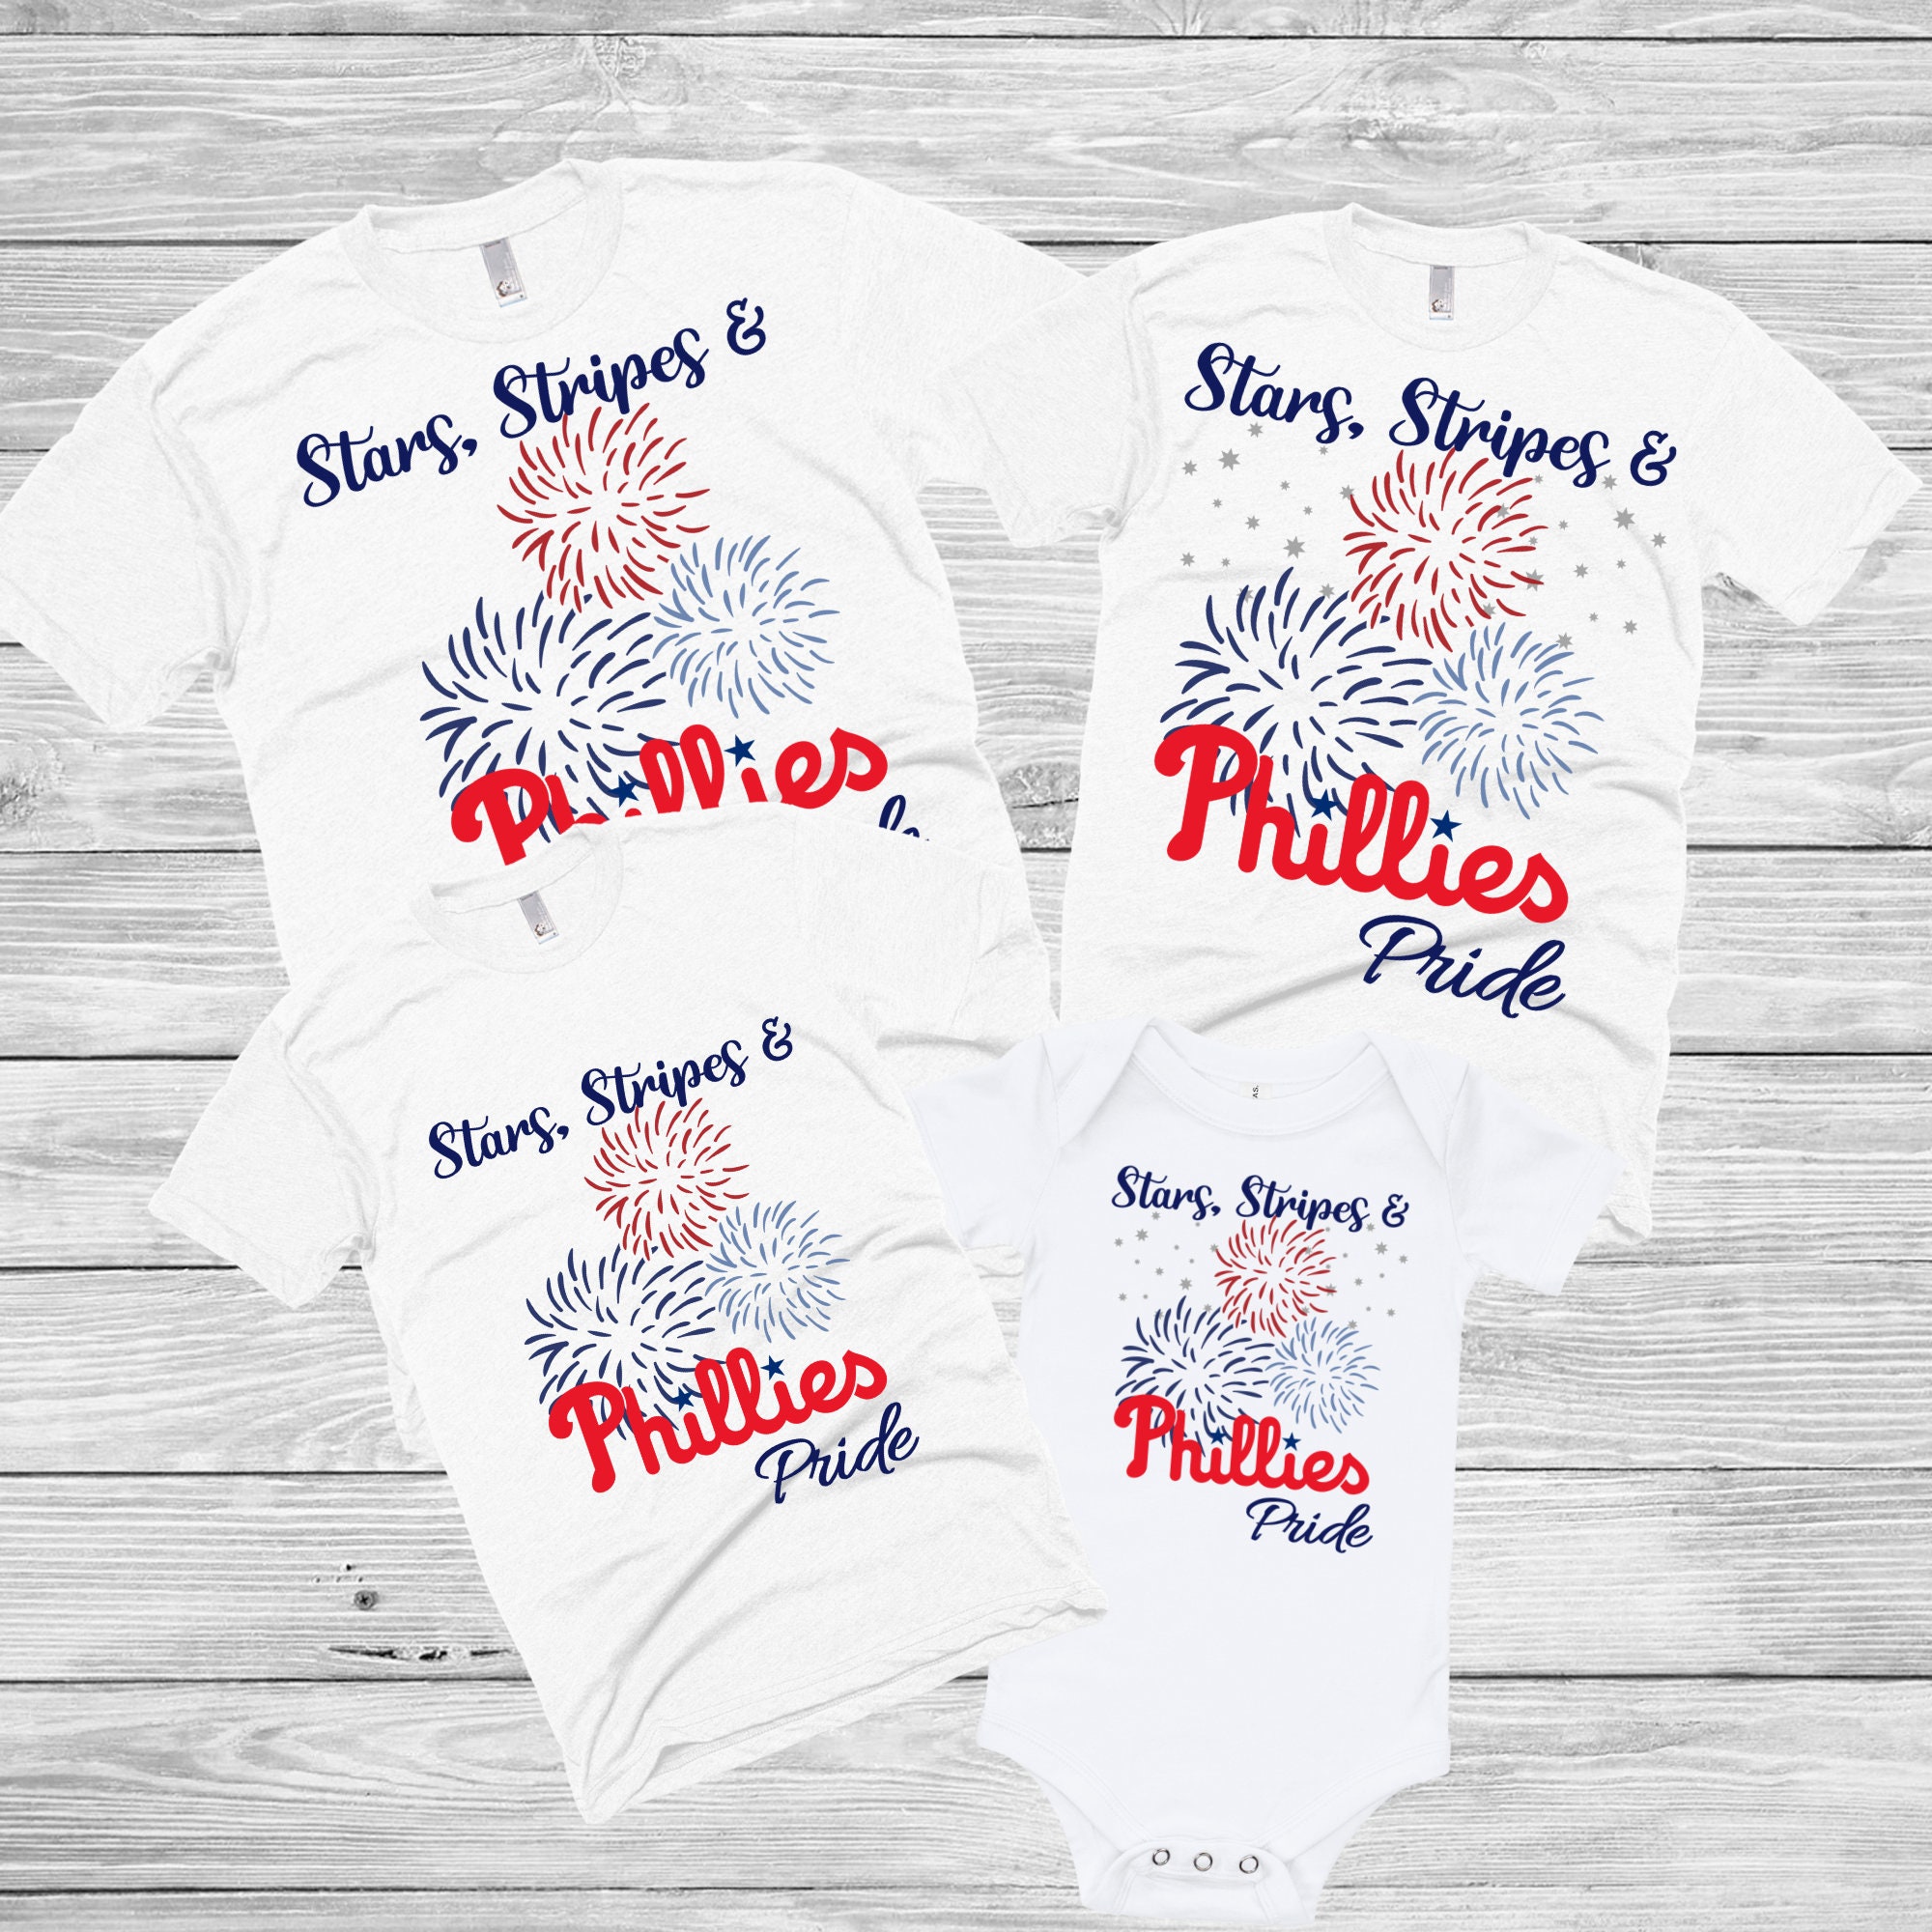 phillies personalized shirts